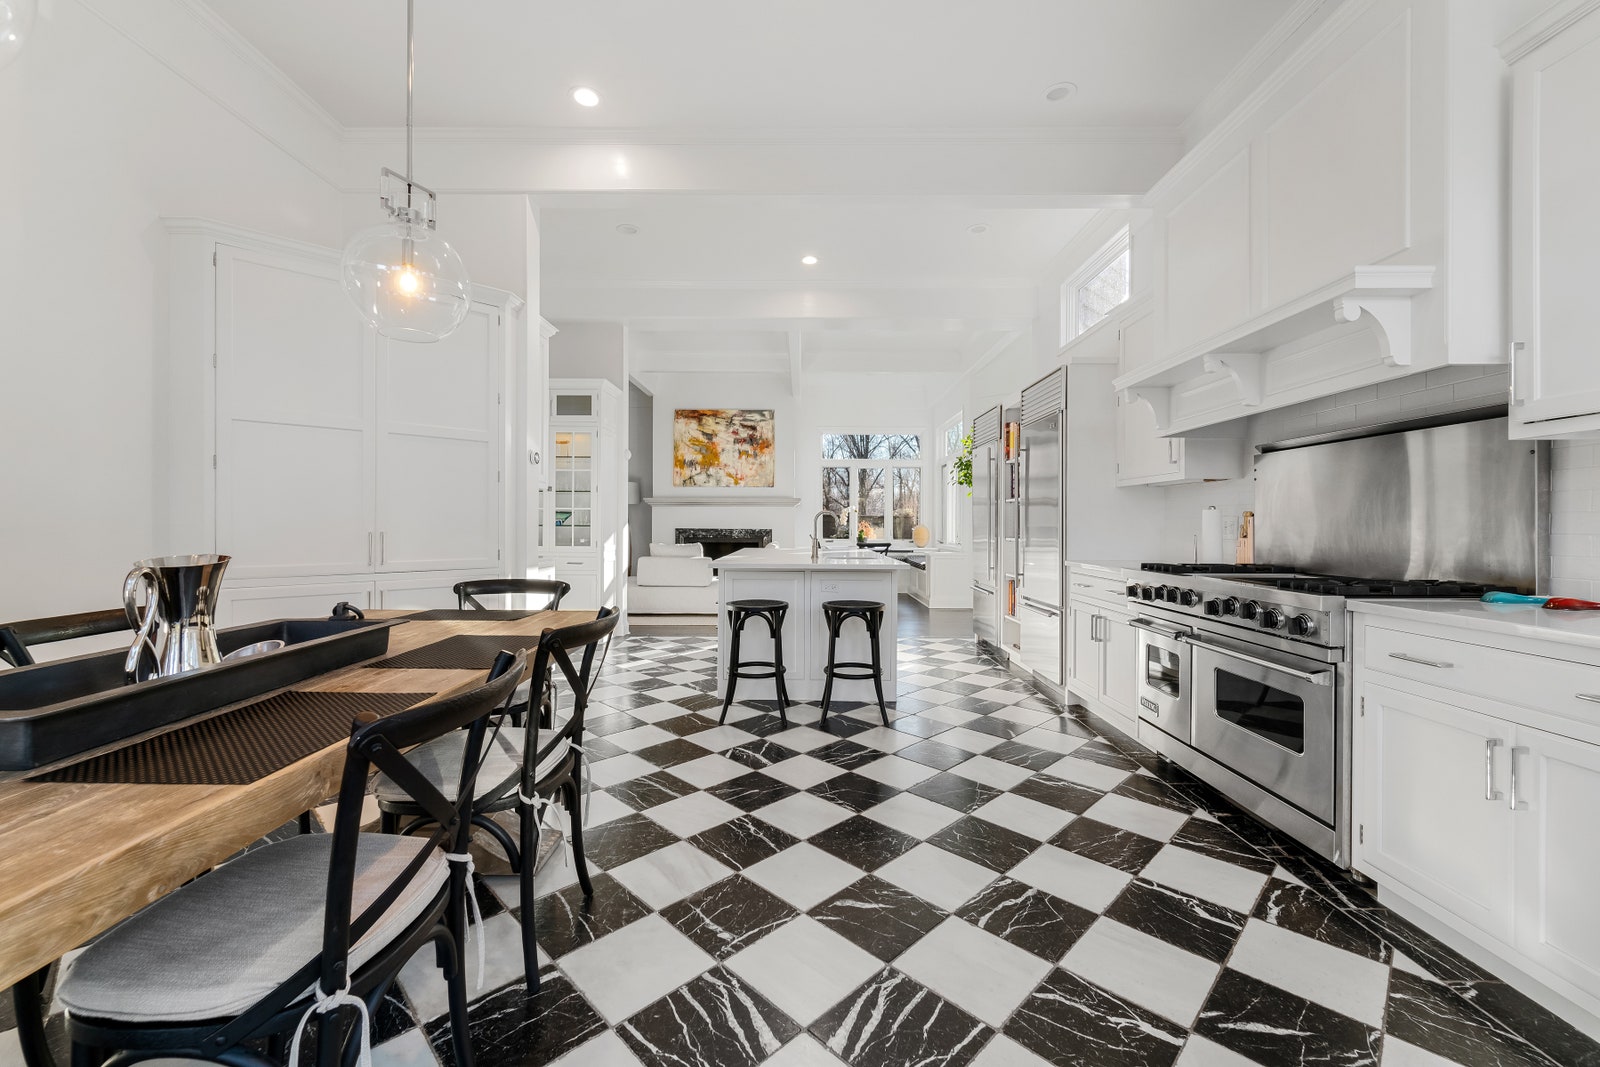 The blackandwhite marble floor of this clients Westchester County home had great potential Esmond Rubinov felt. To help...